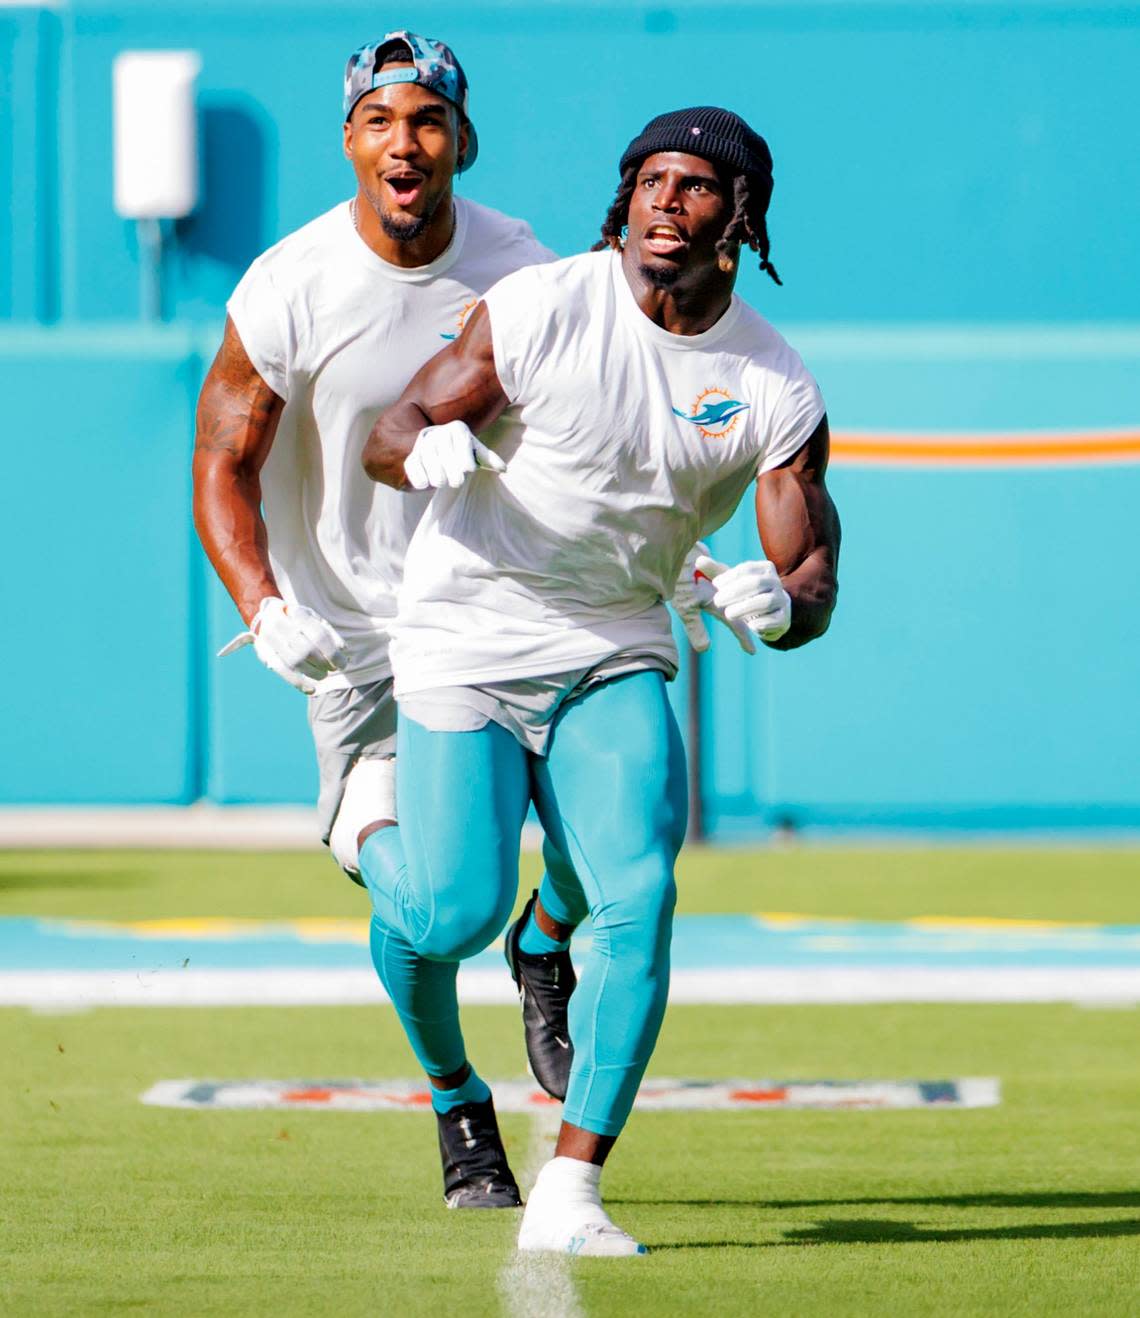 Miami Dolphins wide receivers Jaylen Waddle (17) and Tyreek Hill (10) practice before the start of an NFL preseason football game against the Philadelphia Eagles at Hard Rock Stadium on Saturday, August 27, 2022 in Miami Gardens, Florida.